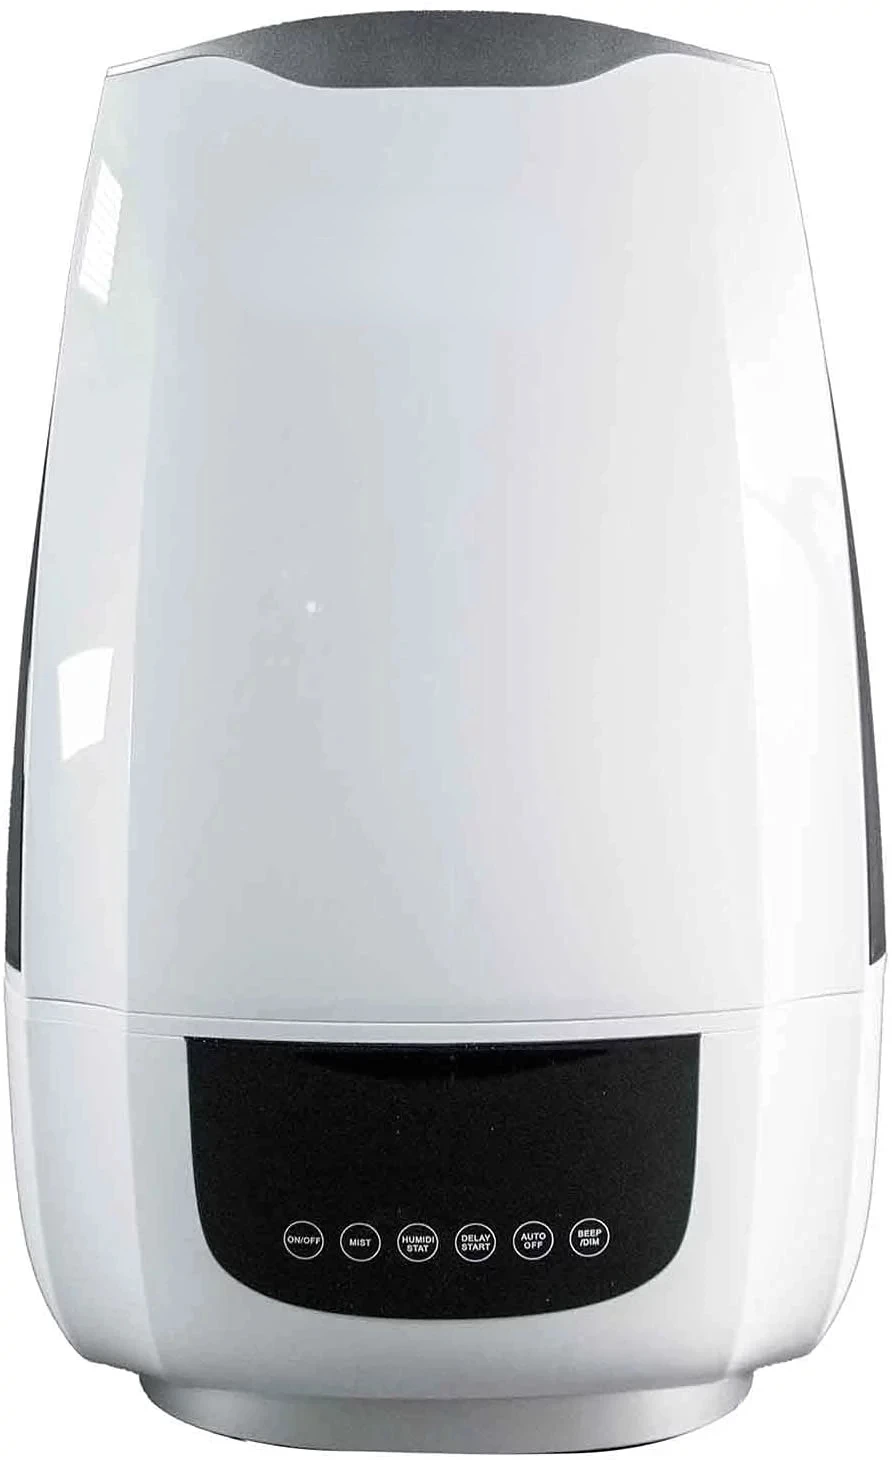 

Cool Mist Ultrasonic Humidifier, 6L Air Humidifier and Essential Oil Diffuser, Adjustable Mist Volume and Humidity Control